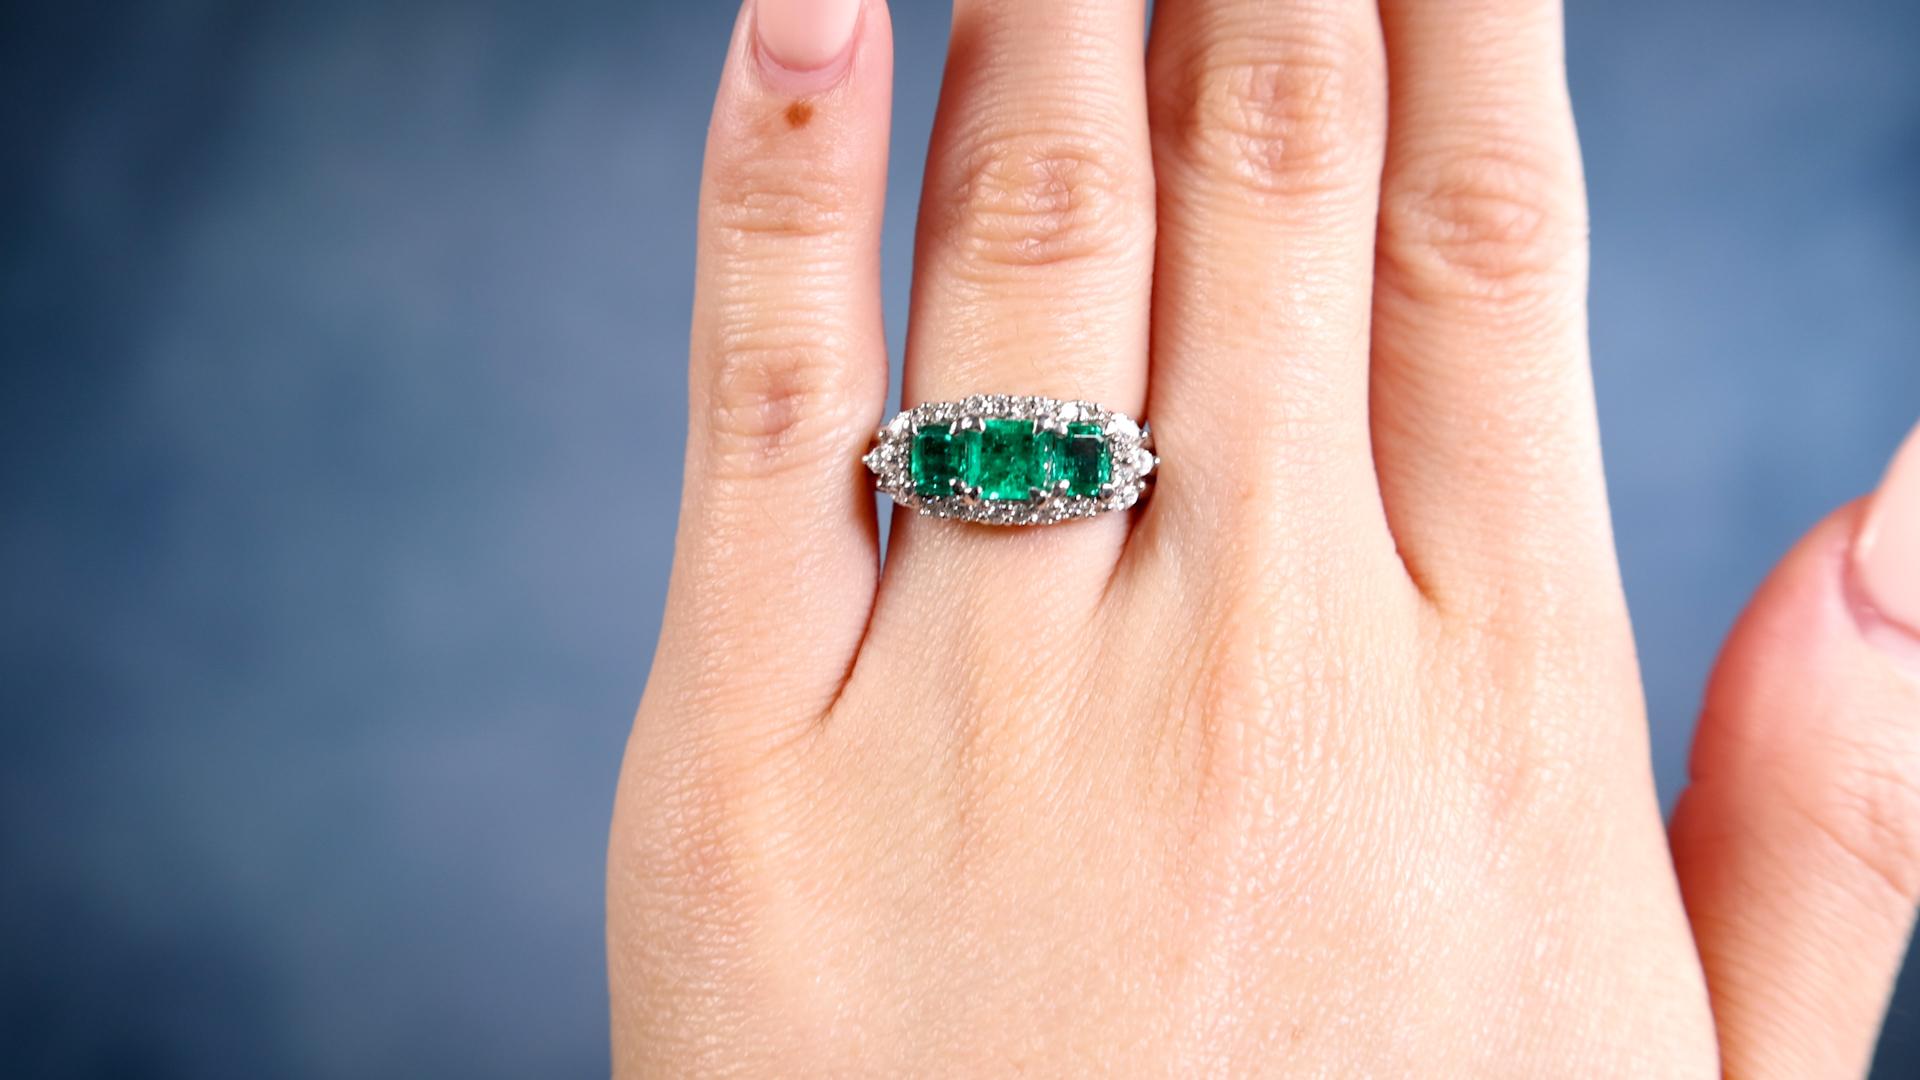 One Vintage Emerald Diamond Three Stone Platinum Ring. Featuring three octagonal step cut emeralds with a total weight of 1.03 carats. Accented by six marquise and 20 round brilliant cut diamonds with a total weight of 0.45 carat, graded